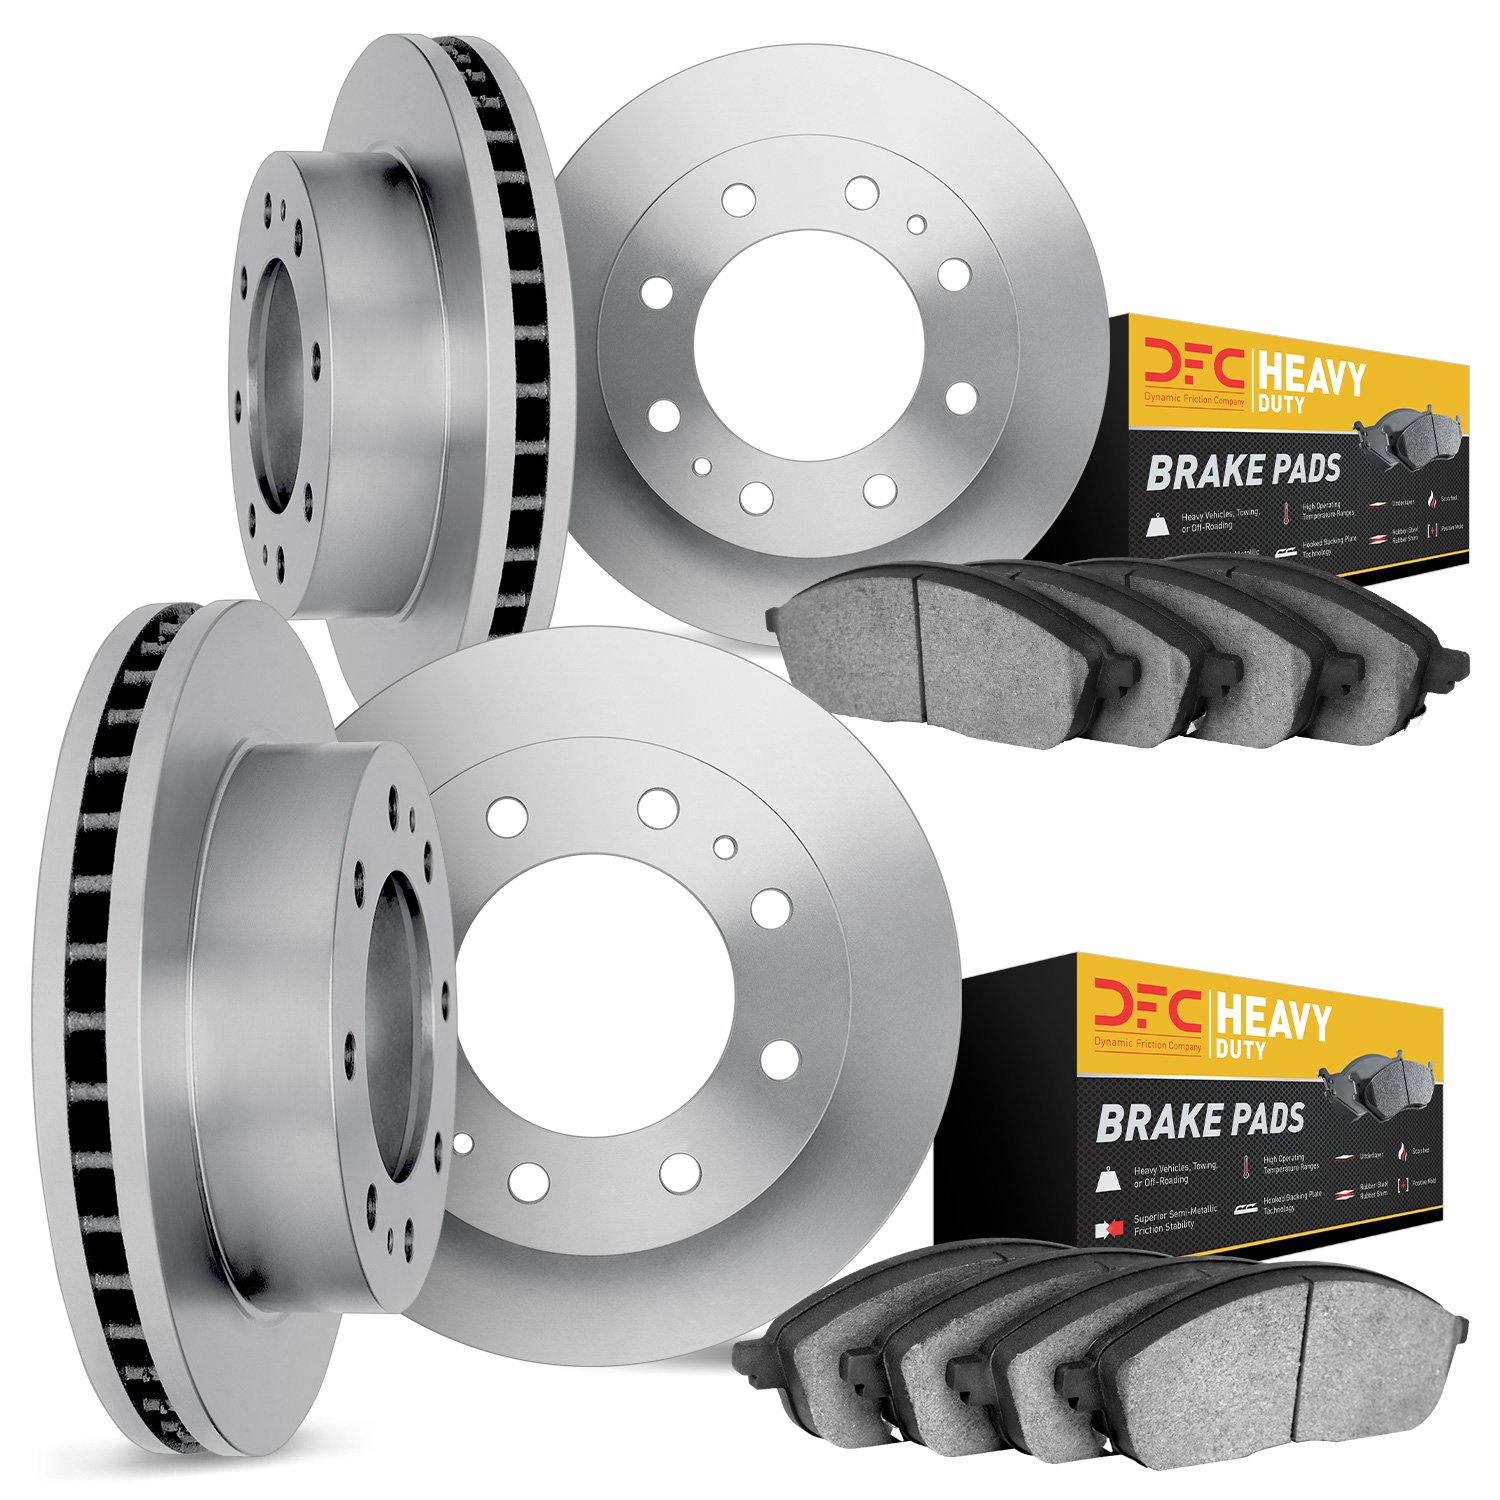 6204-99318 Brake Rotors w/Heavy-Duty Brake Pads Kit, Fits Select Ford/Lincoln/Mercury/Mazda, Position: Front and Rear